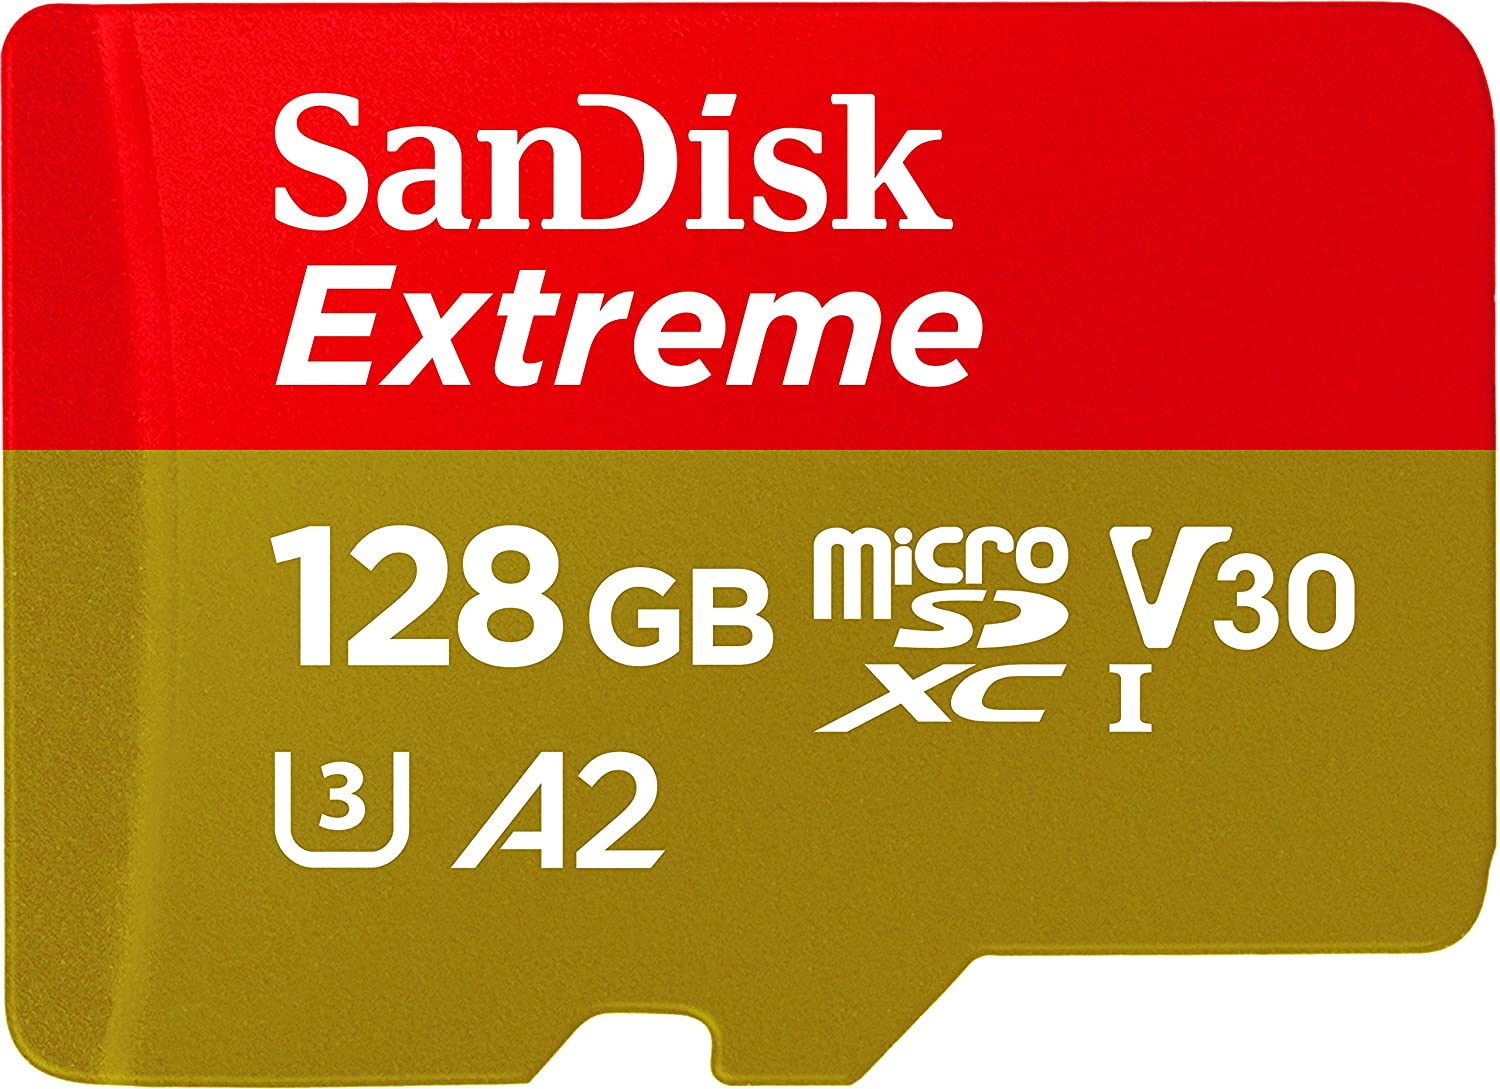 SanDisk Extreme Micro SD card, 128GB with SD Adapter - CamDo Solutions